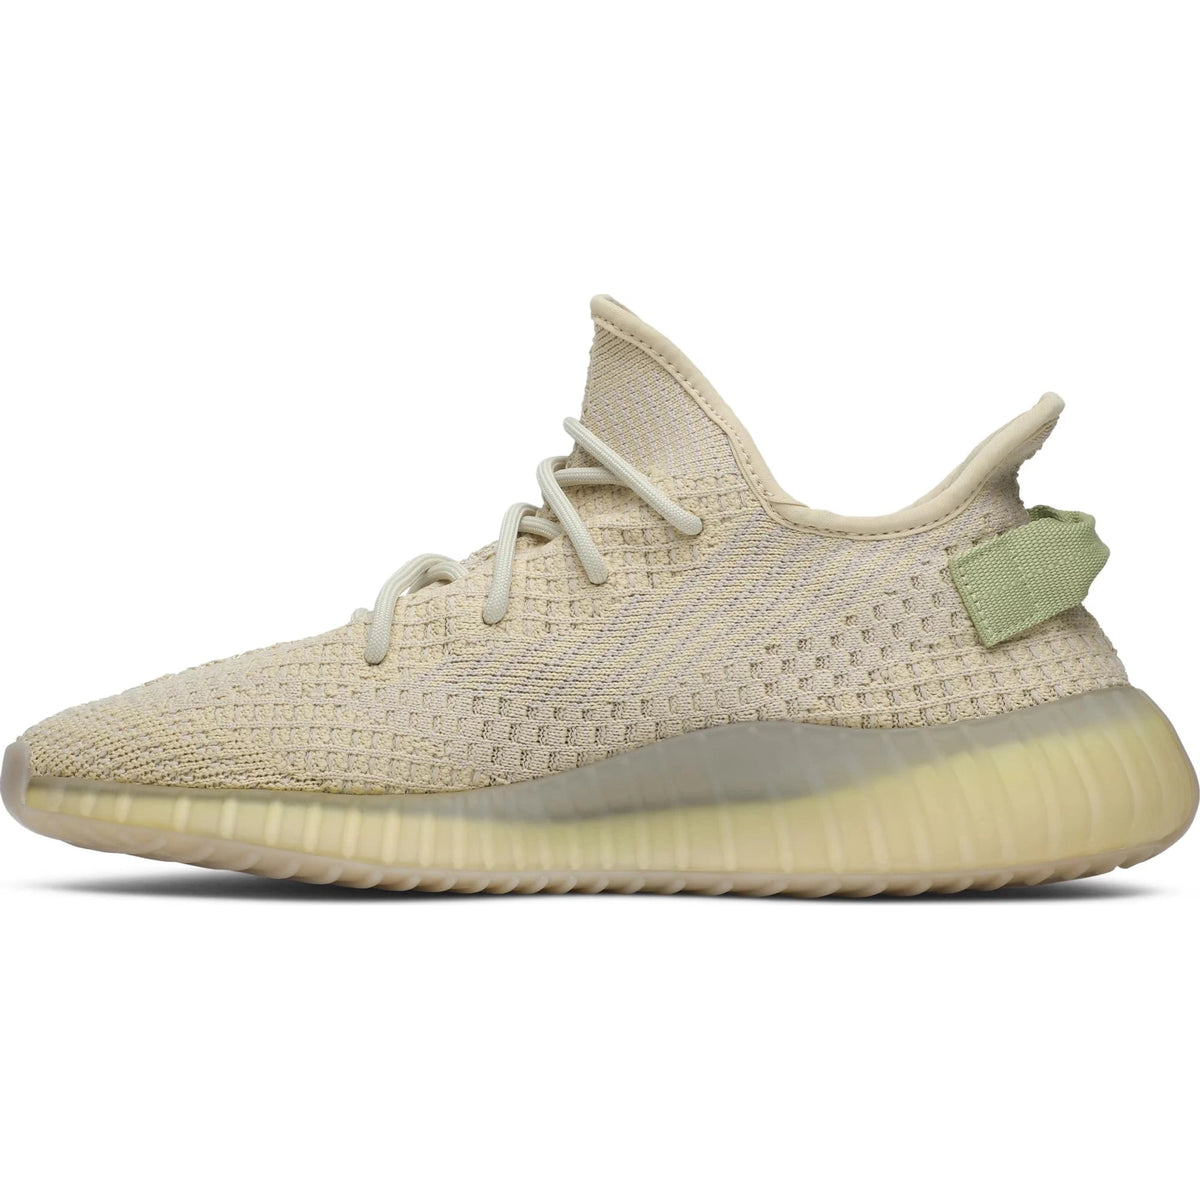 Adidas Yeezy Boost 350 V2 Flax | Waves Never Die | Adidas | Sneakers